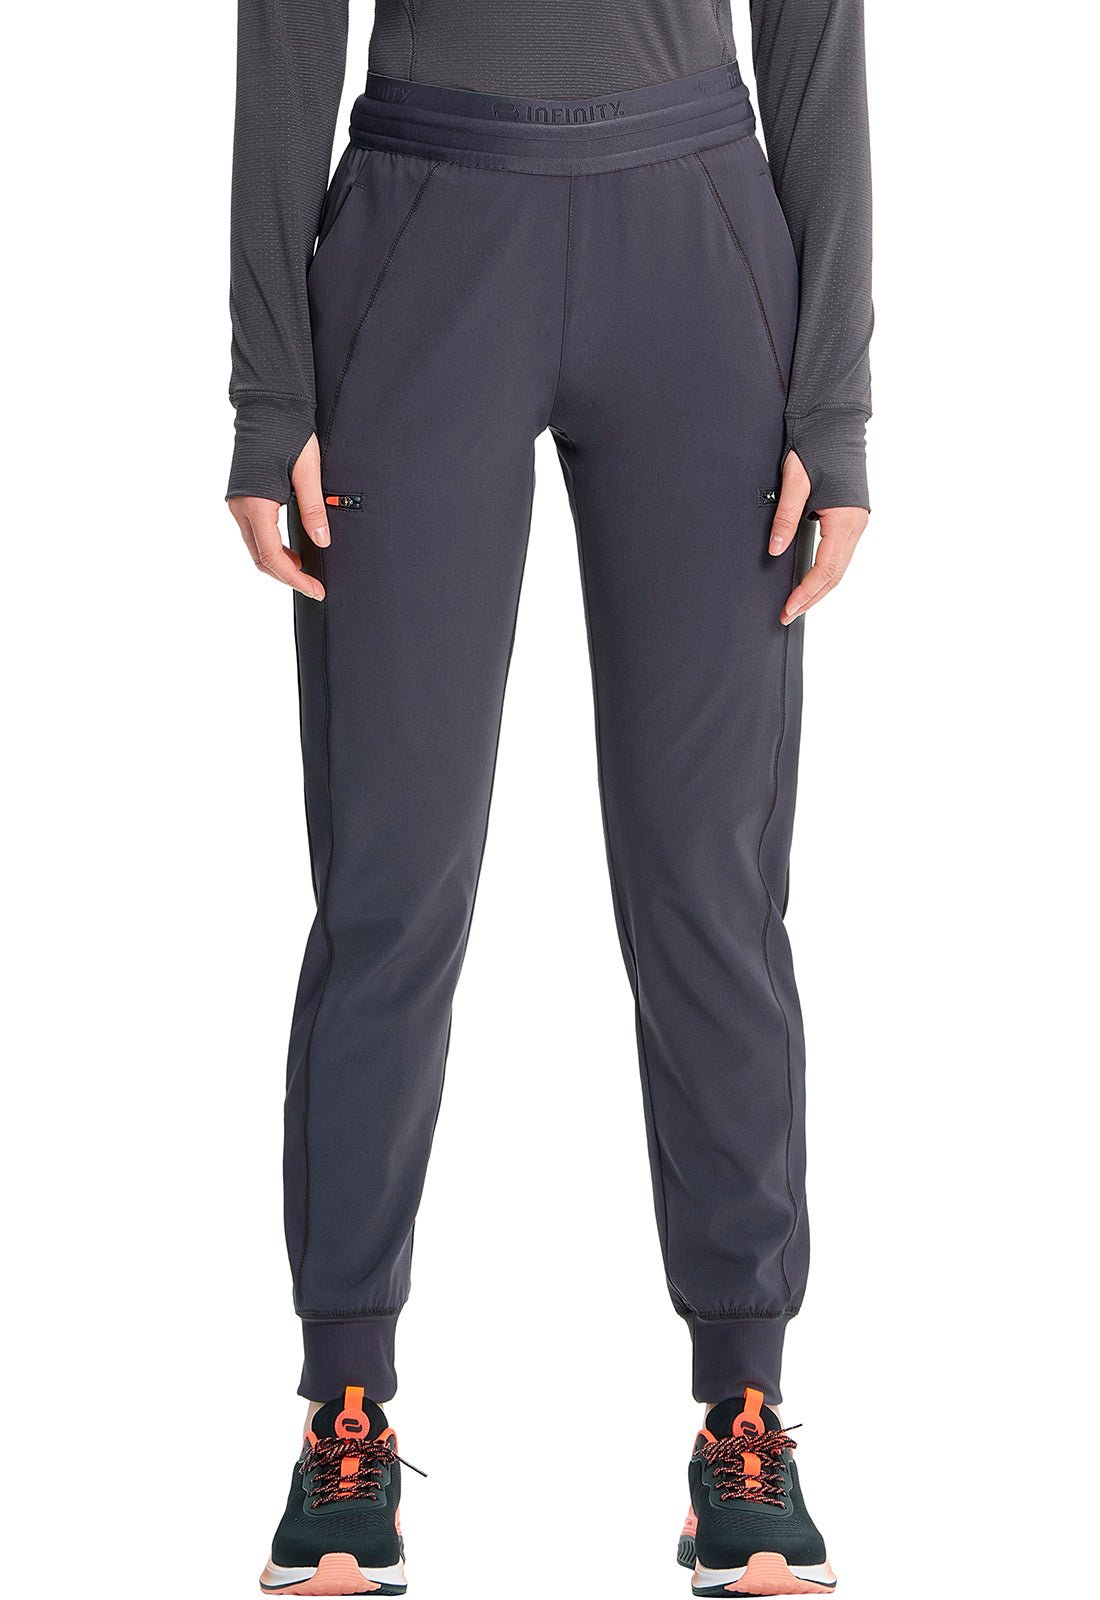 Cherokee Infinity GNR8 Jogger Pant IN122A in Black, Navy, Pewter, Royal - Scrubs Select